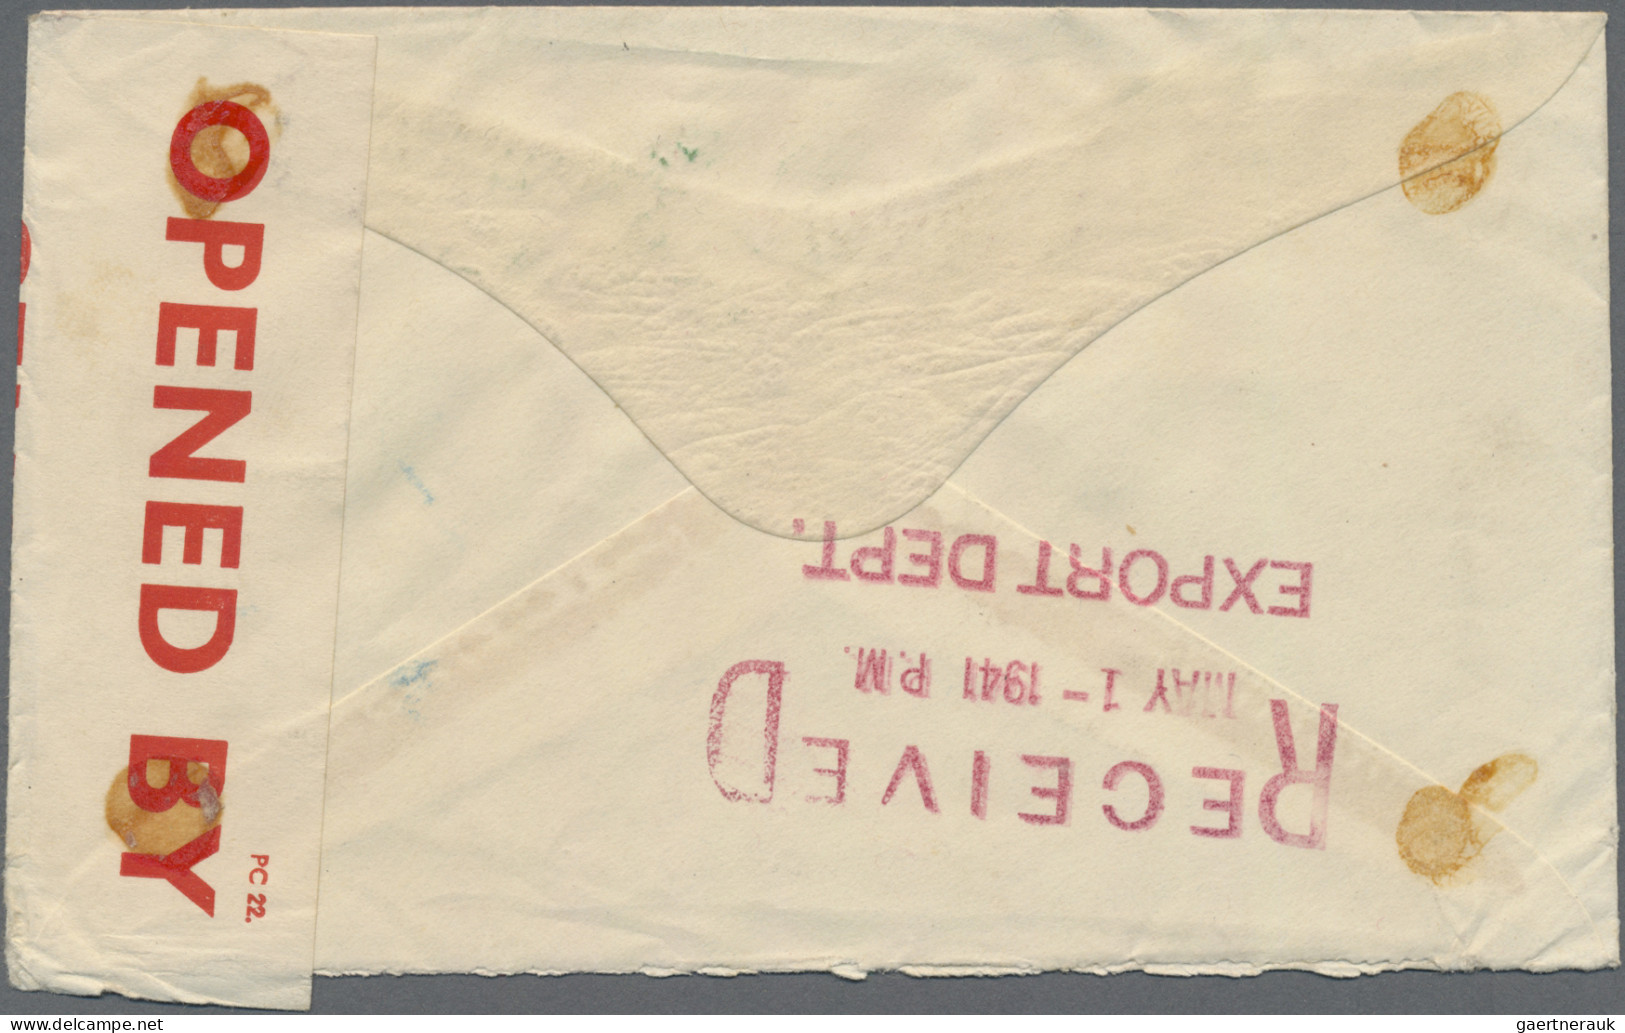 Aden: 1941 Censored Cover From Aden To Kron, Ohio, U.S.A. Franked By KGV. 1939 2 - Yémen